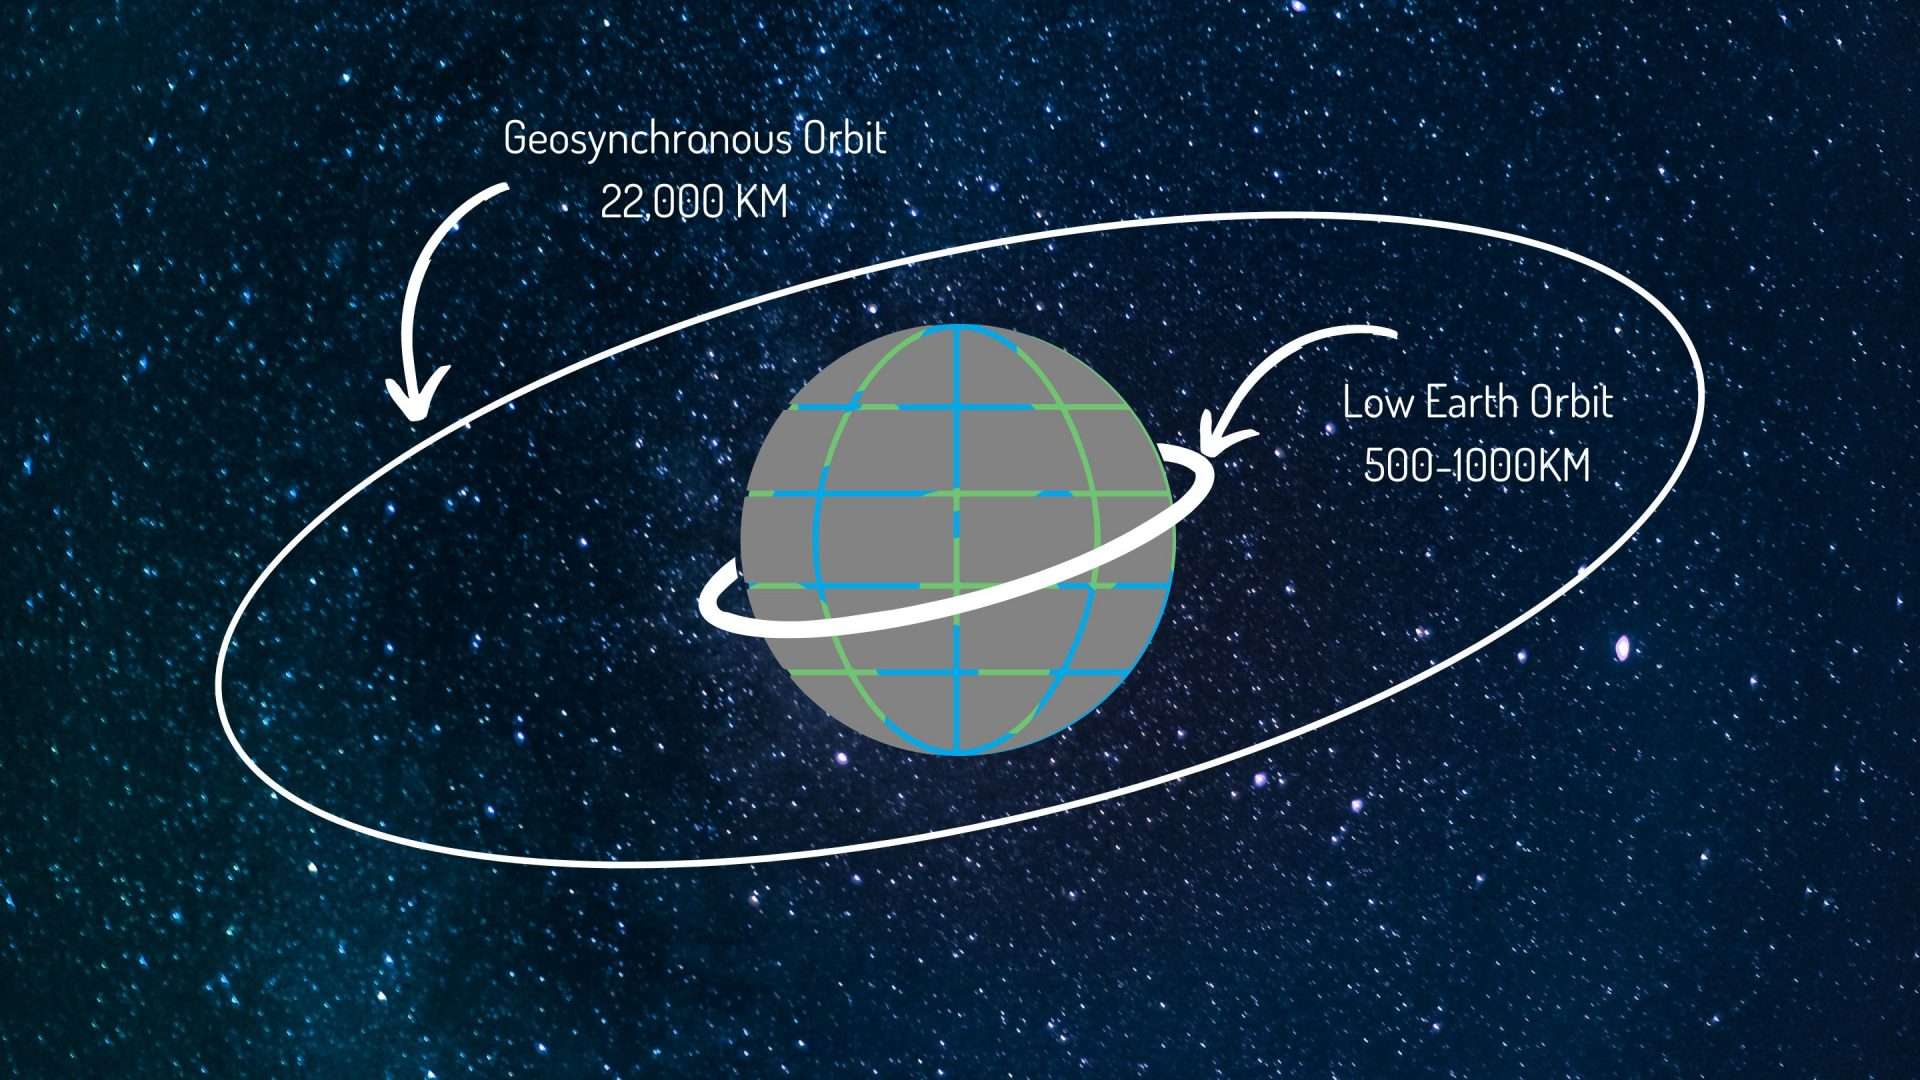 Schematic of geosynchronous vs low earth orbit